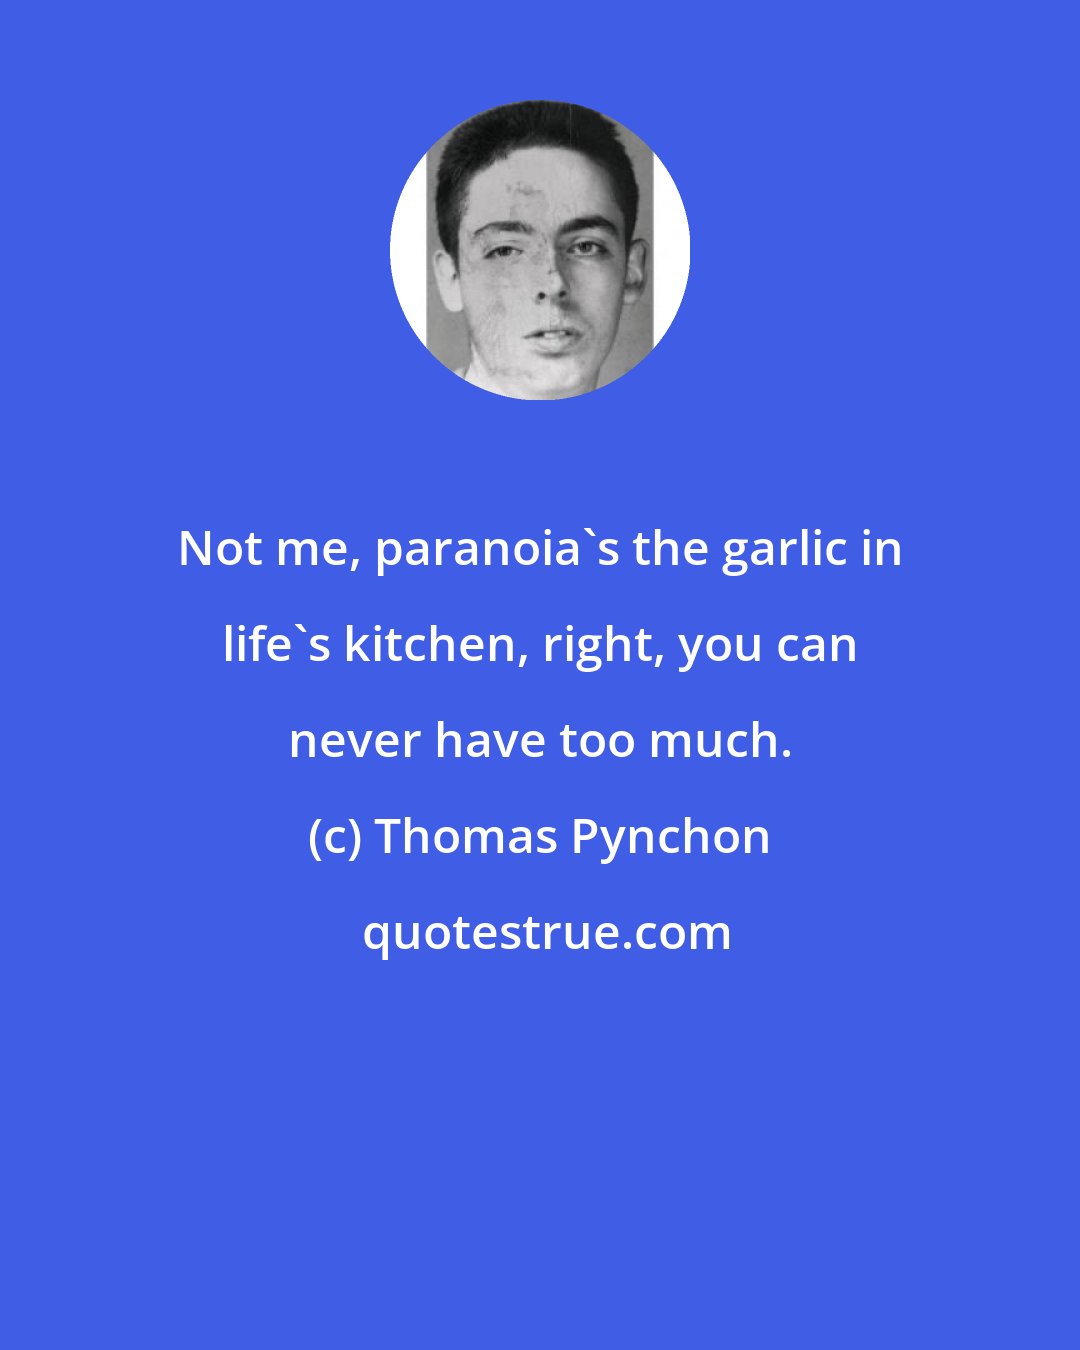 Thomas Pynchon: Not me, paranoia's the garlic in life's kitchen, right, you can never have too much.